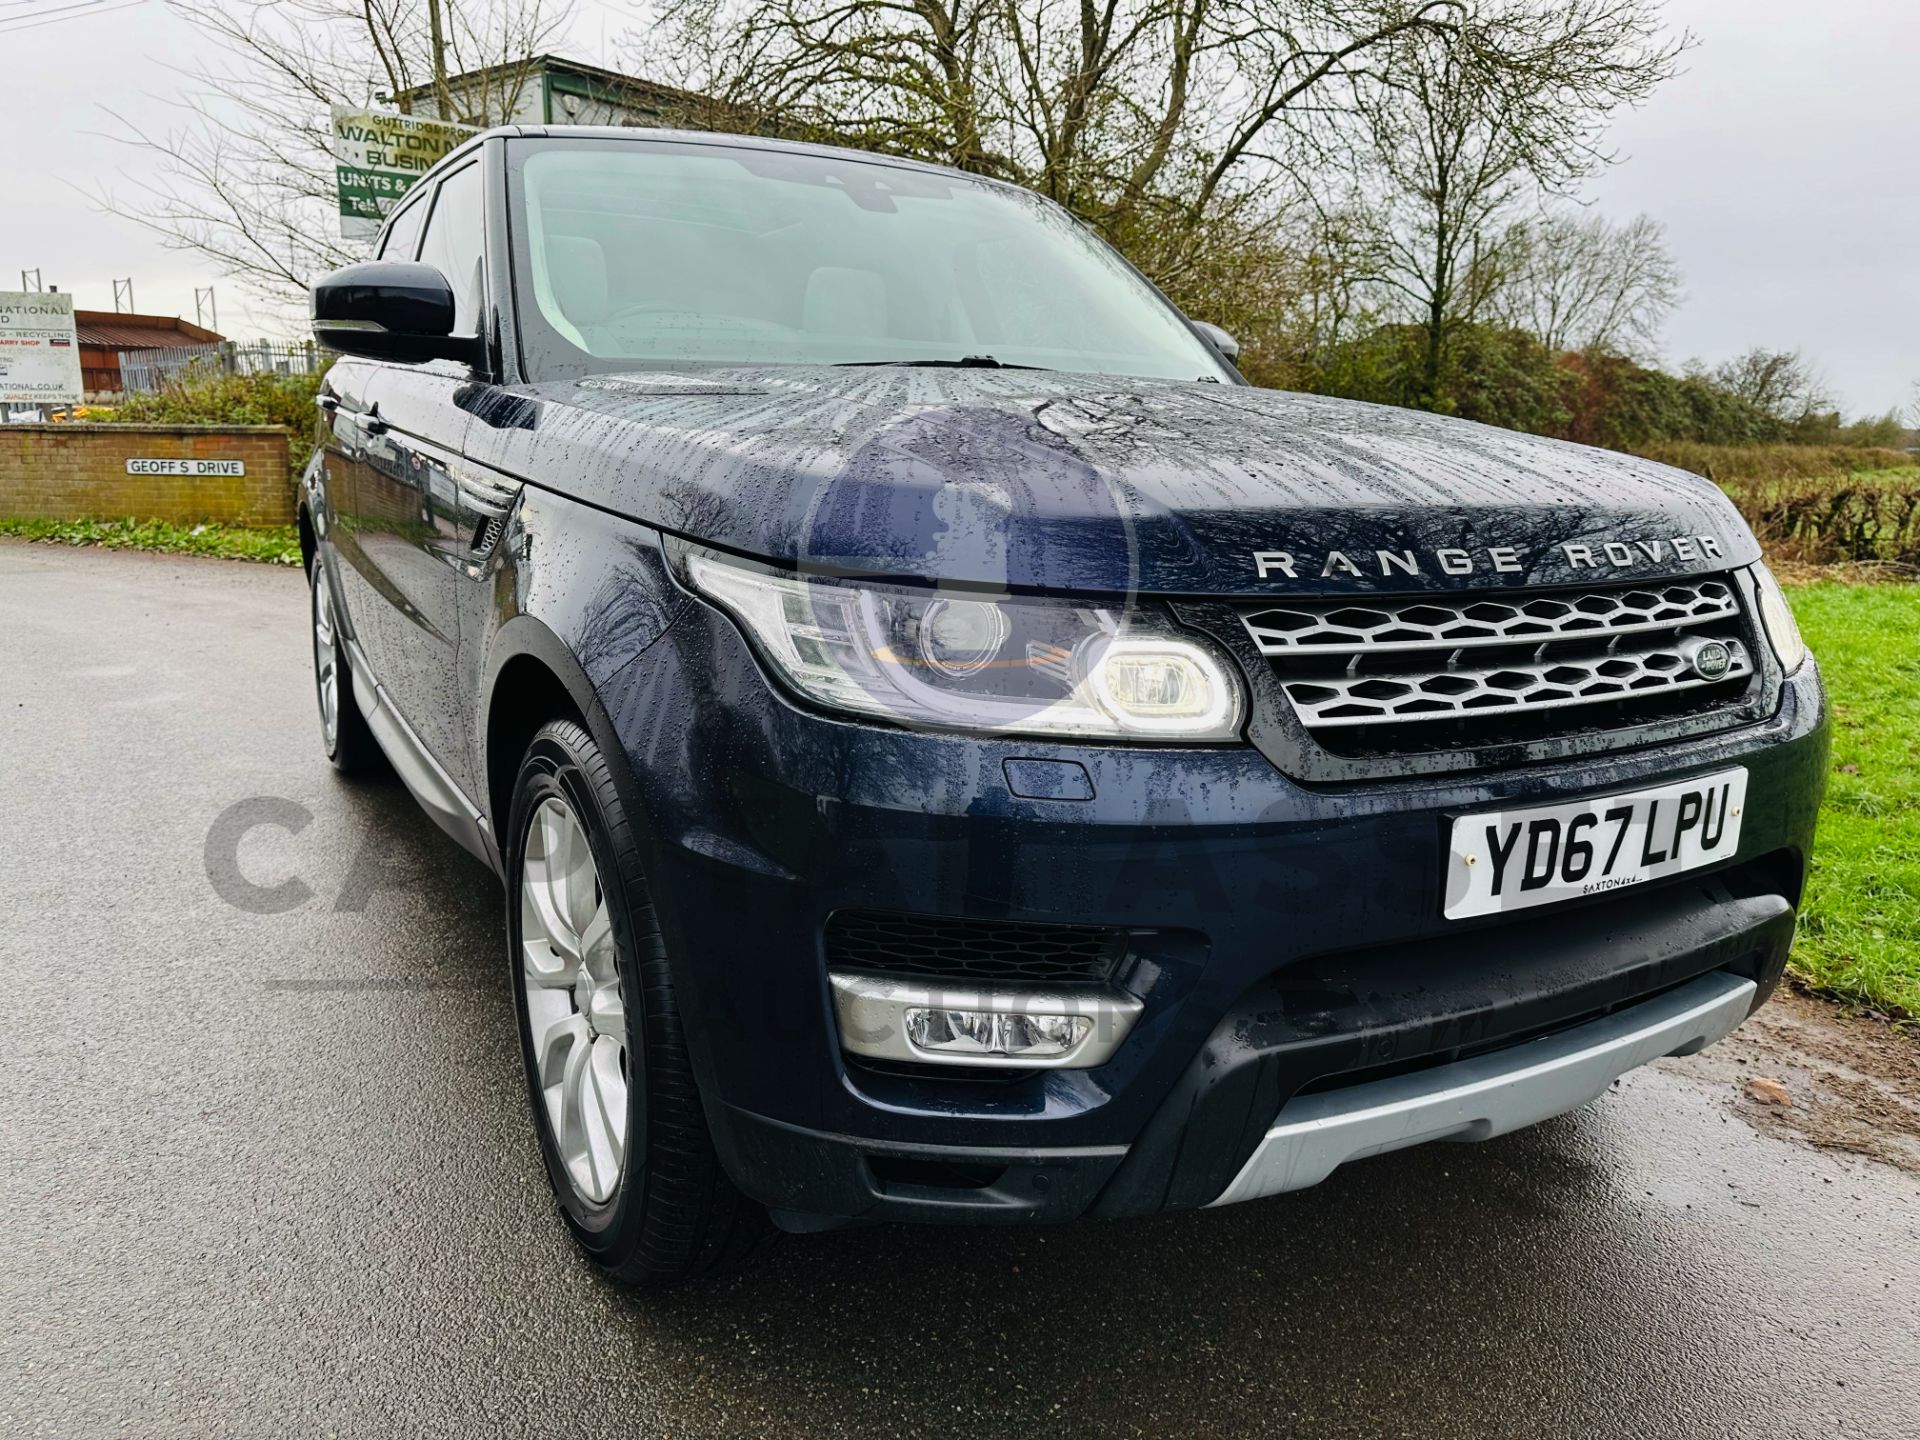 (ON SALE) RANGE ROVER SPORT *HSE EDITION* *AUTOMATIC / COMMANDSHIFT* - 2018 MODEL - NO VAT!!! - Image 3 of 41